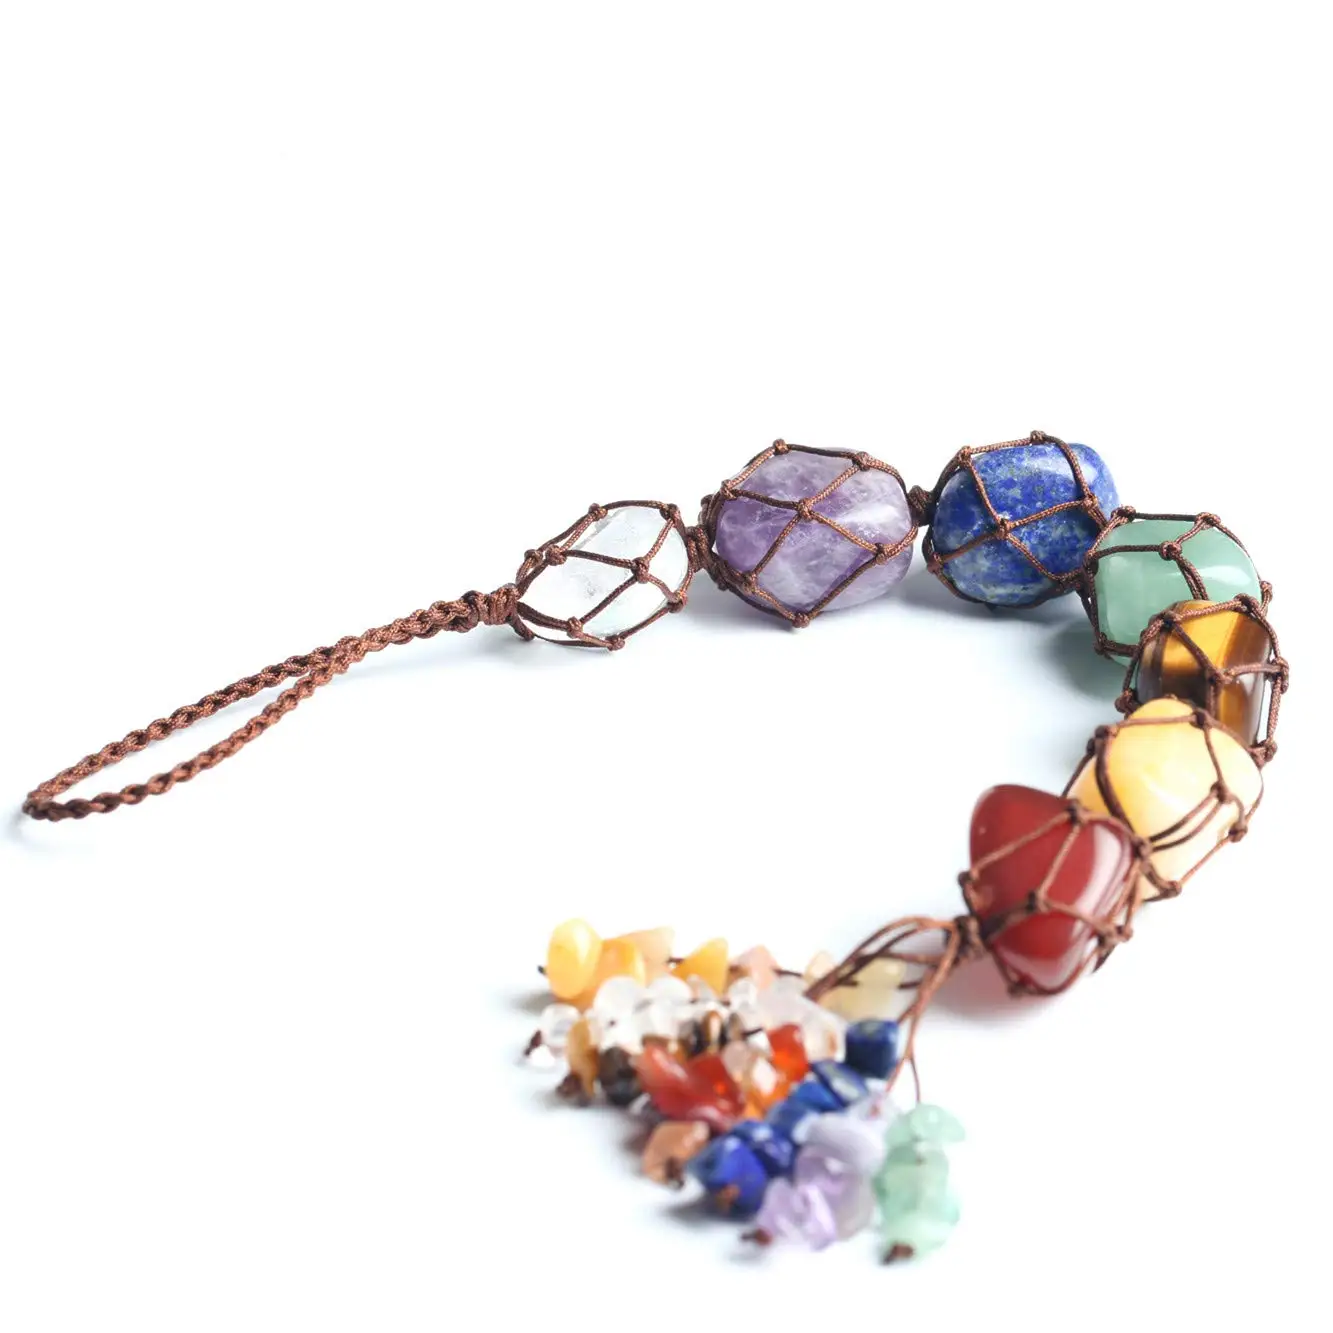 Details about   7 Chakra Gemstones Healing Feng Shui Crystals Window Car Decorations Hanging Orn 